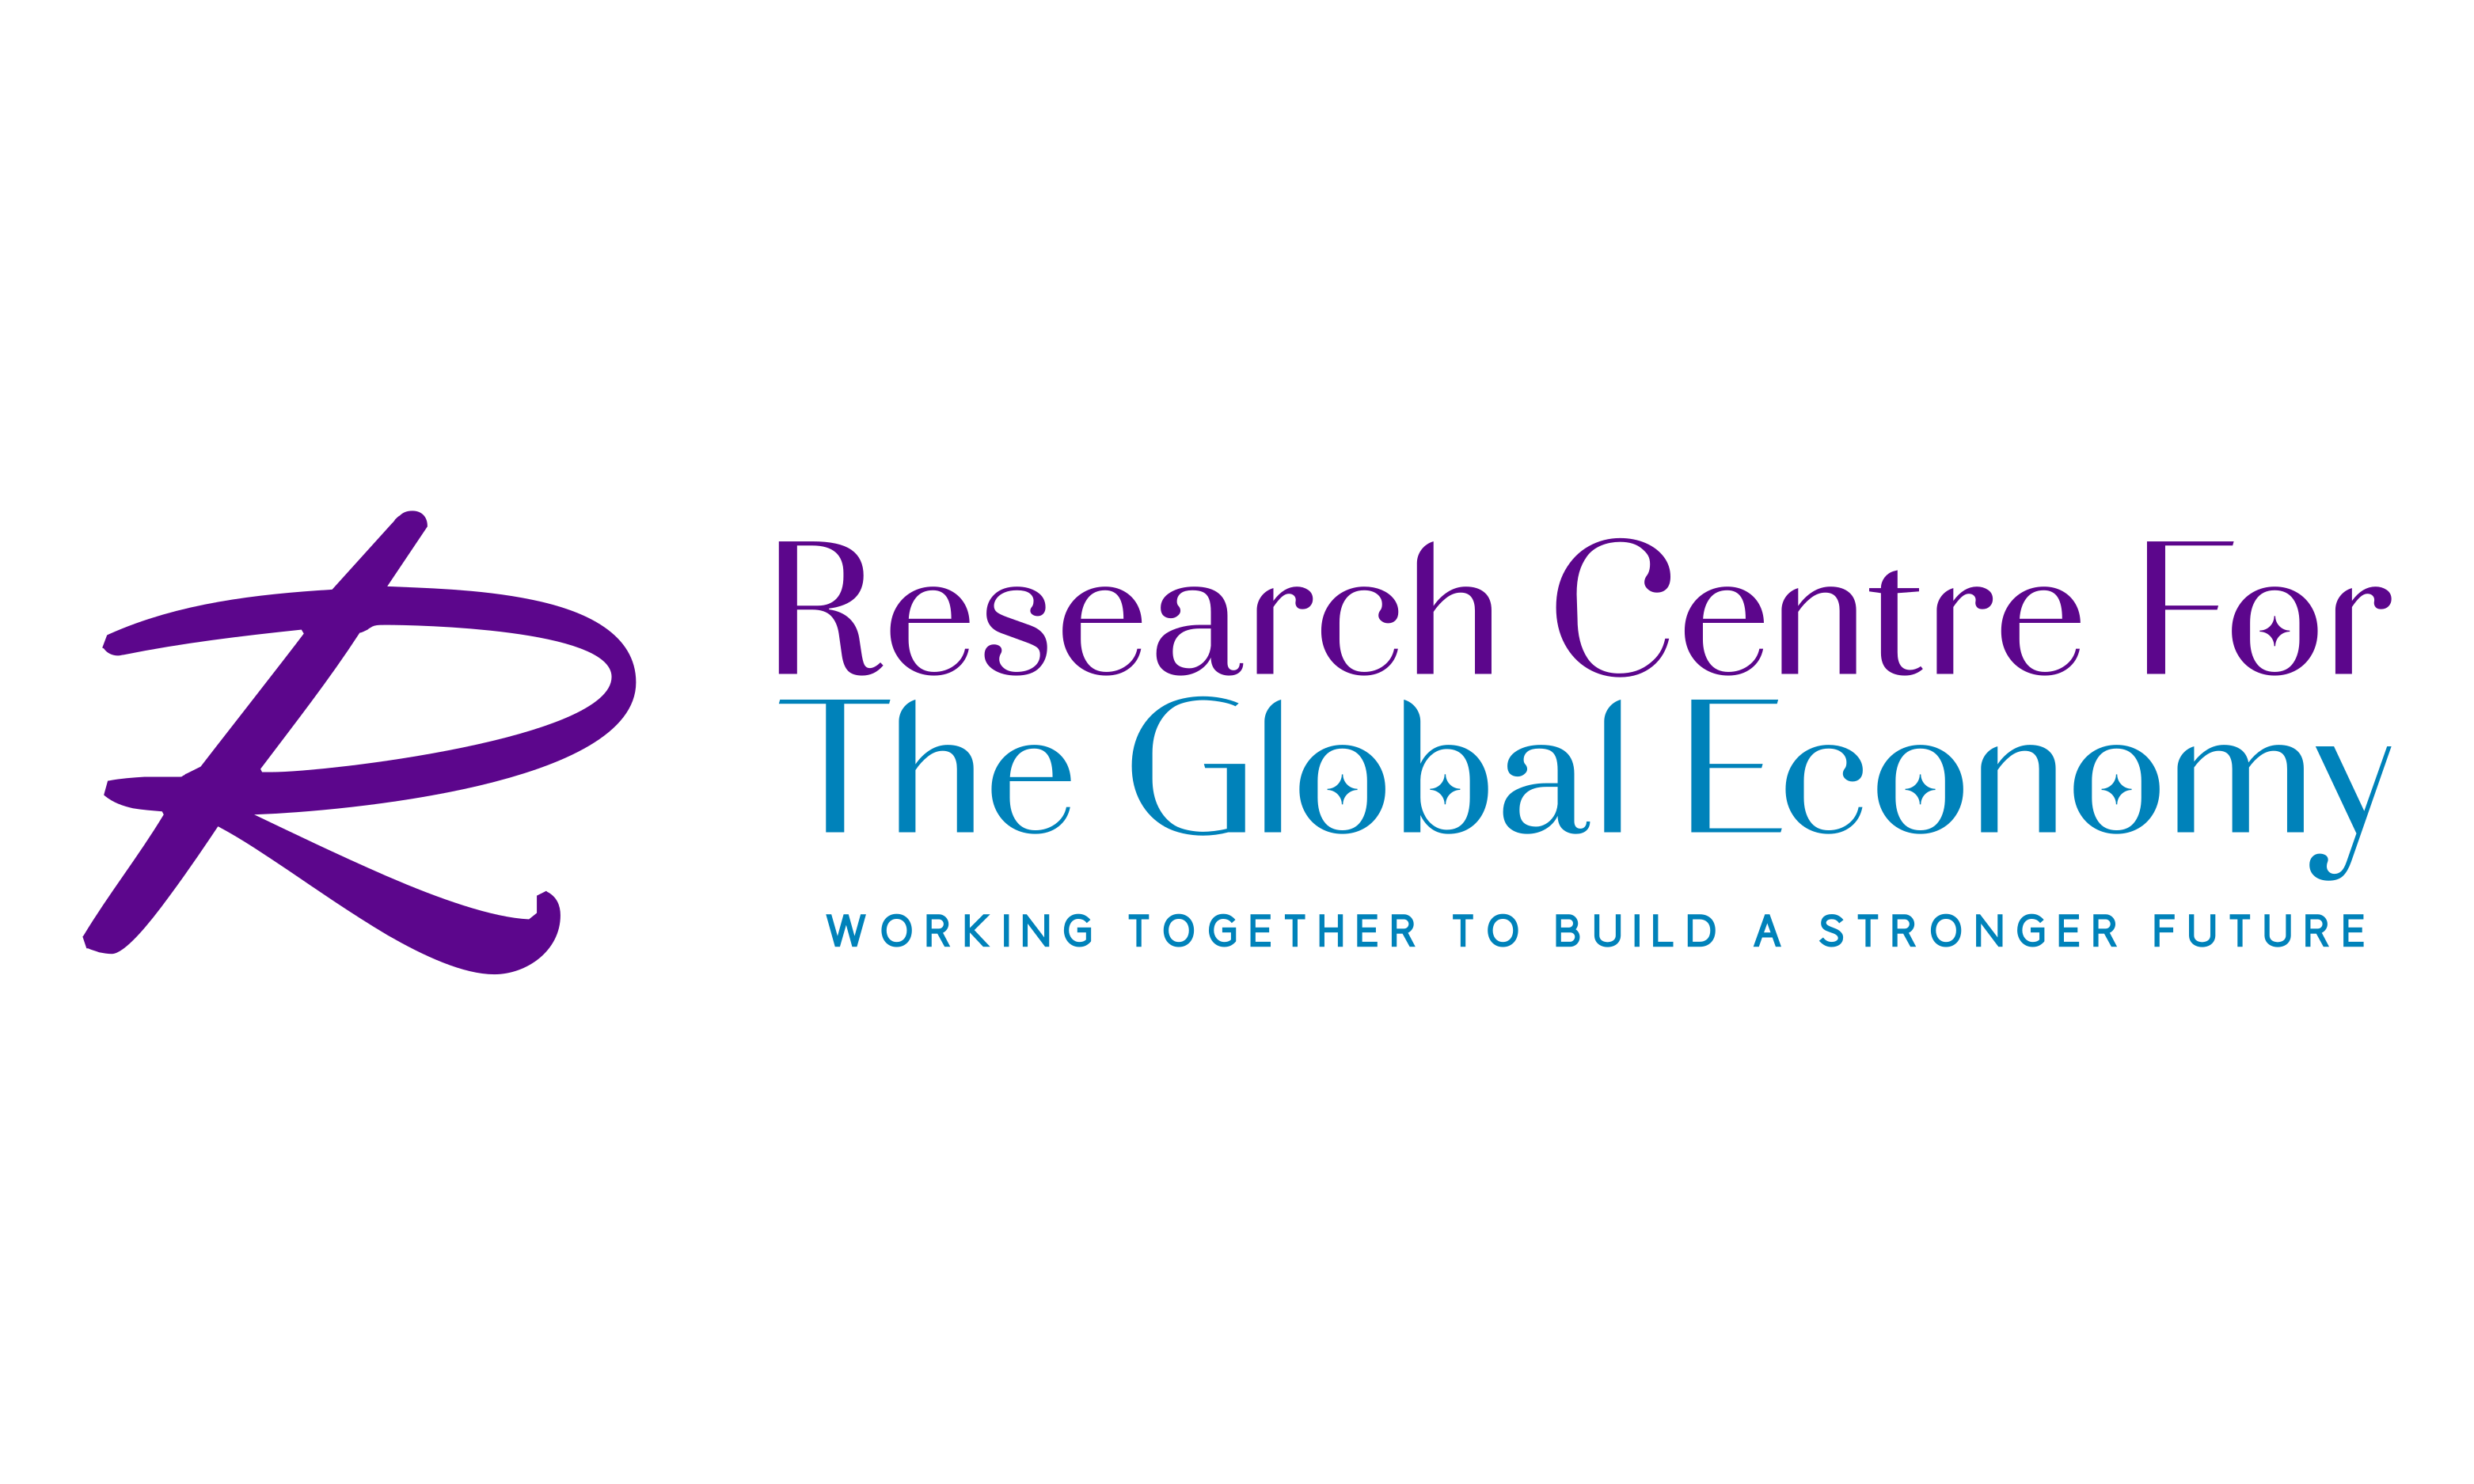 Research Centre for the Global Economy Ltd